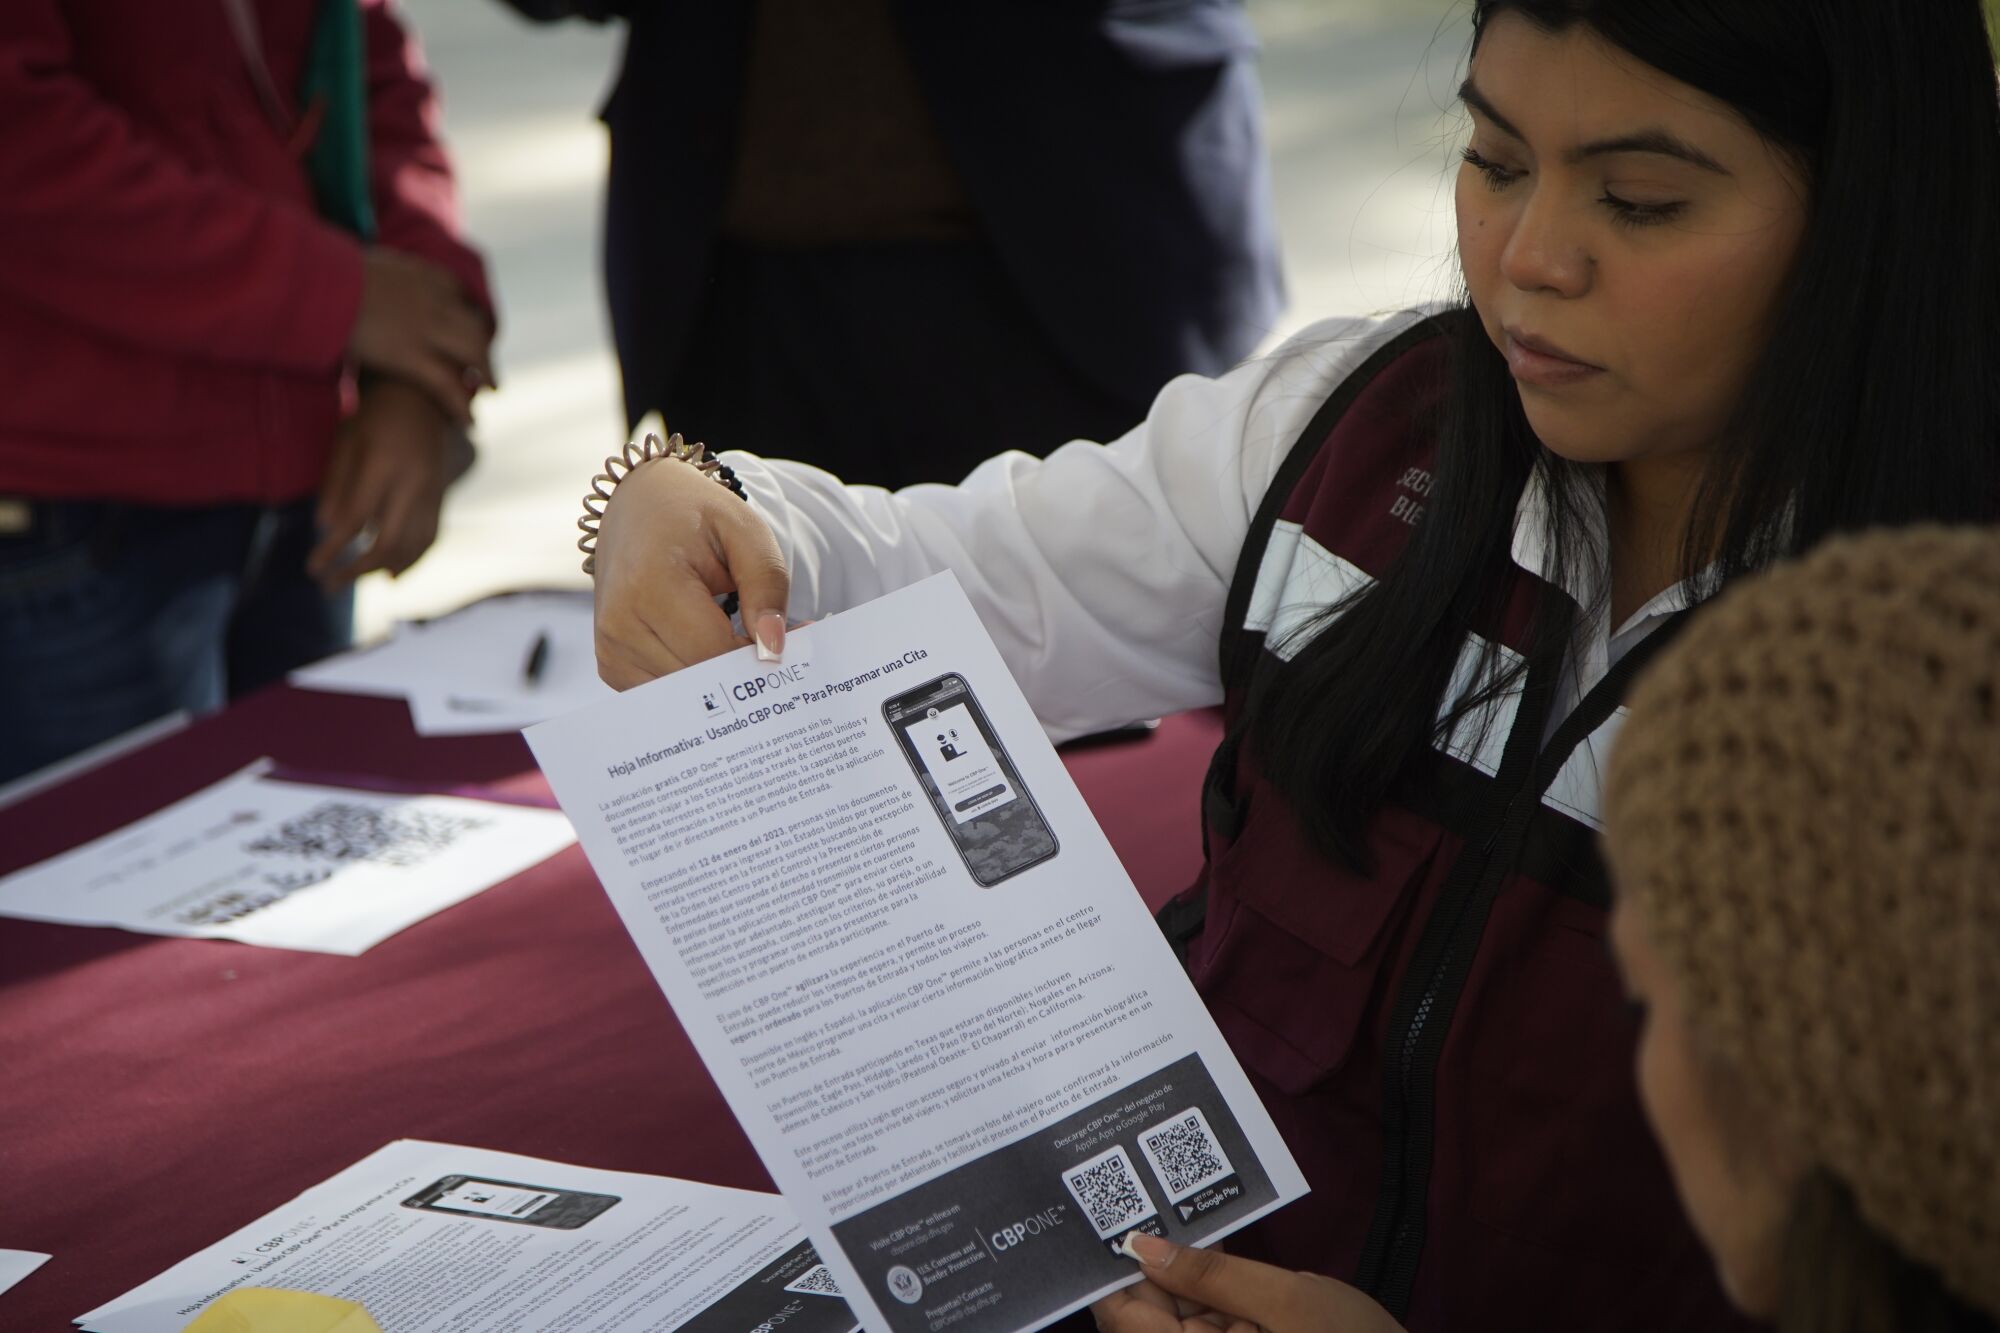 An official shows information about CBP One to a woman from Michoacan